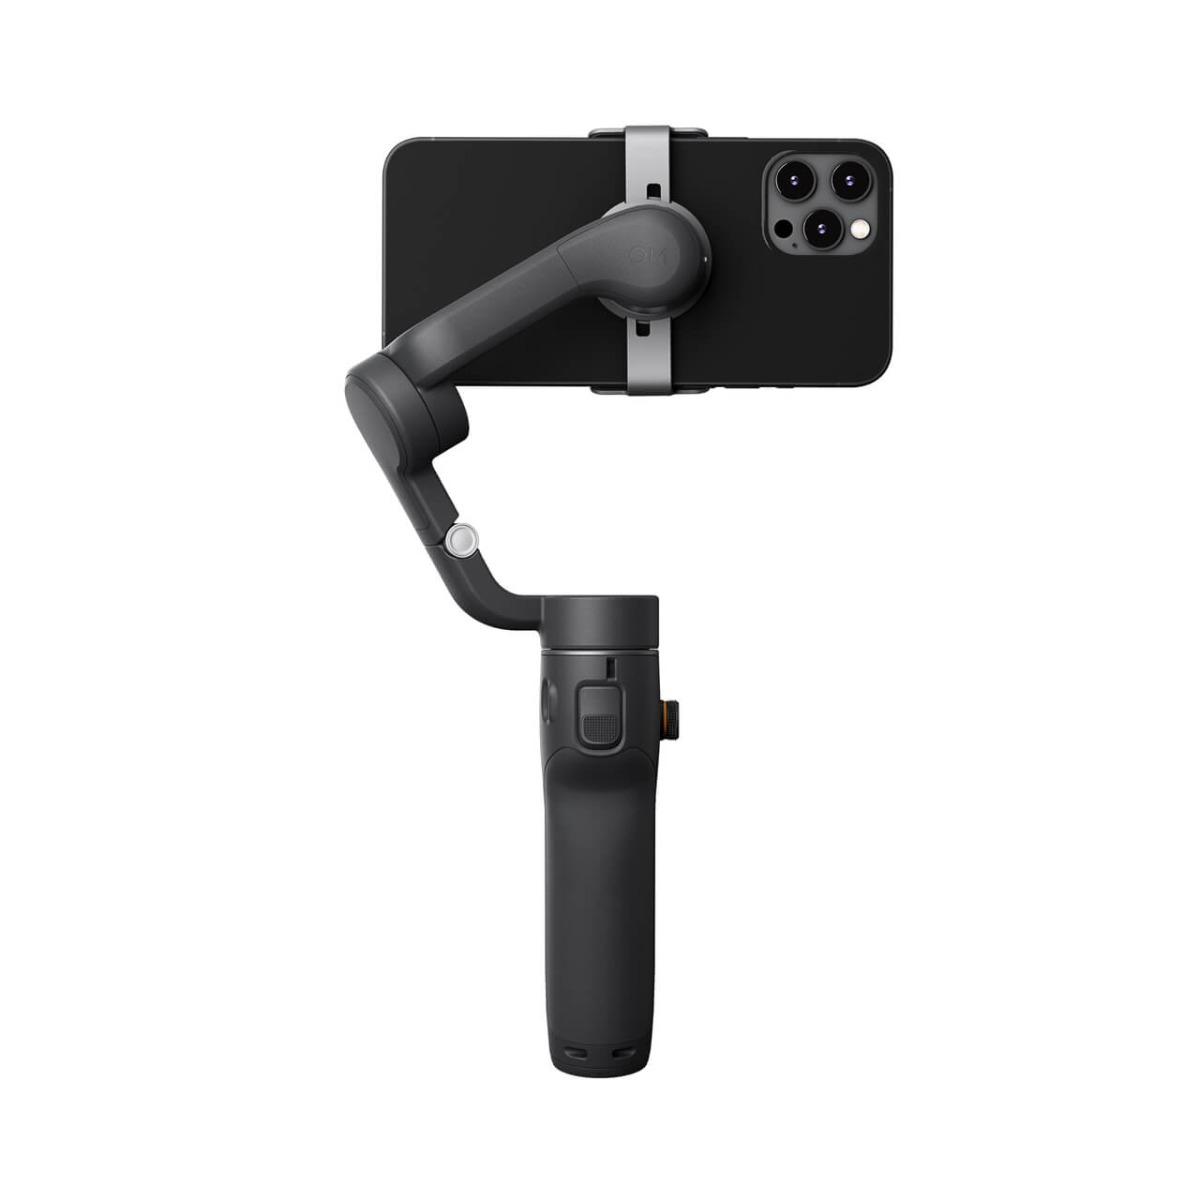 DJI's Osmo Mobile 6 foldable gimbal offers big features in a